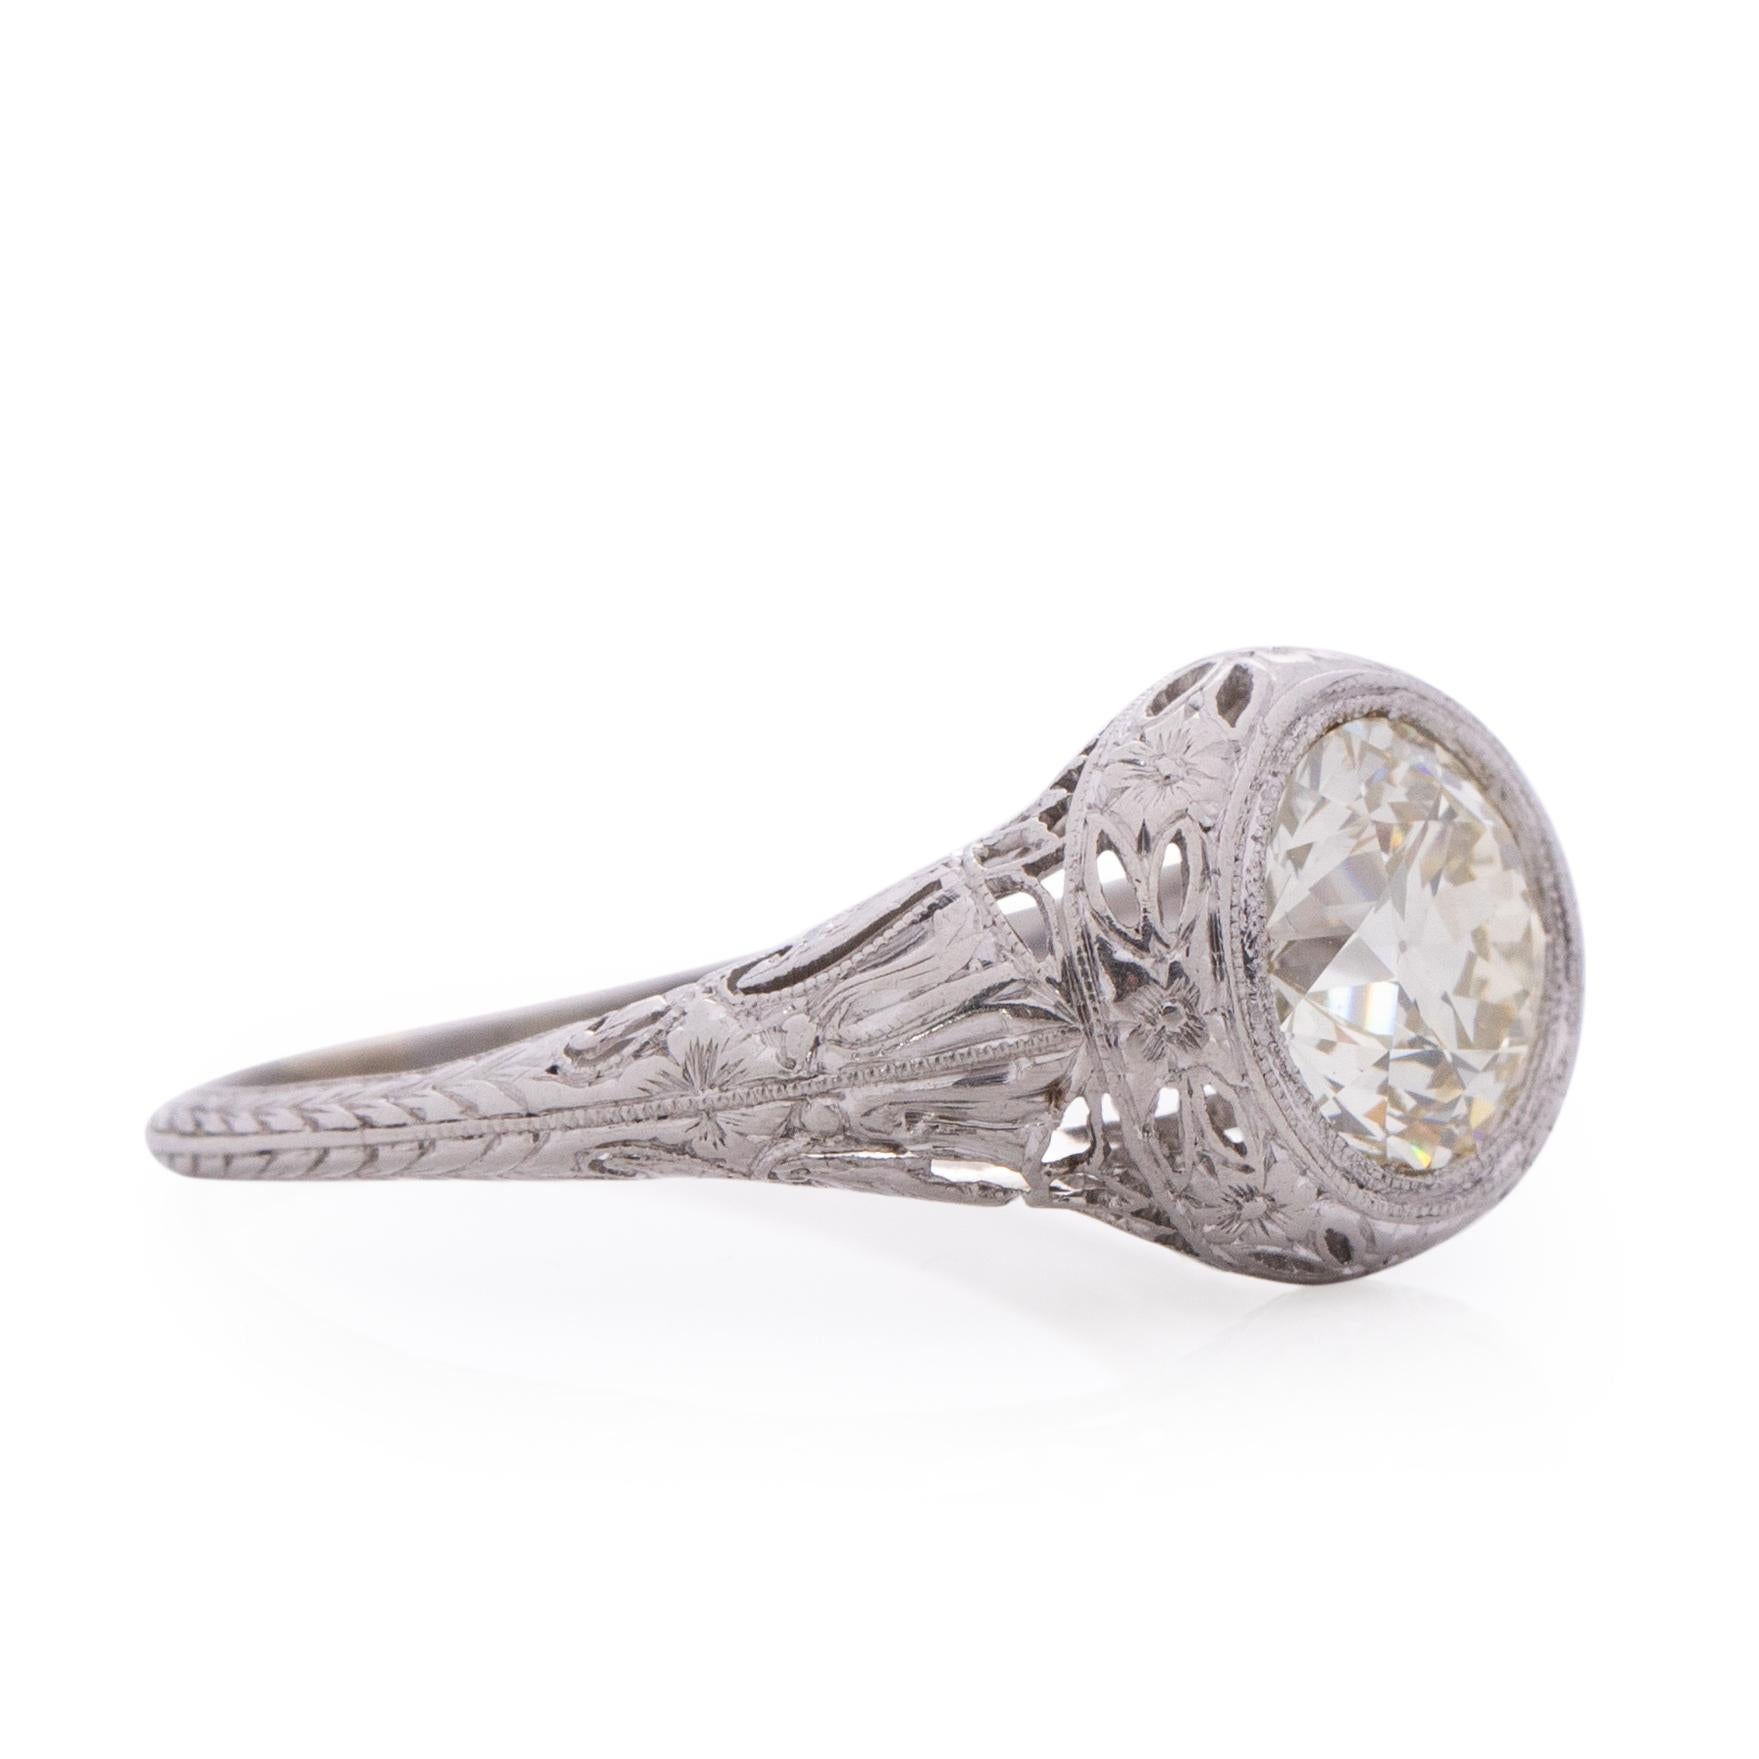 Here we have a spectacular 2.19Ct Brilliant cut Edwardian filigree ring. The details of this ring are unbelievably crisp and in pristine condition for its age. The floral filigree work wraps around the center diamond then wraps down the shank. A